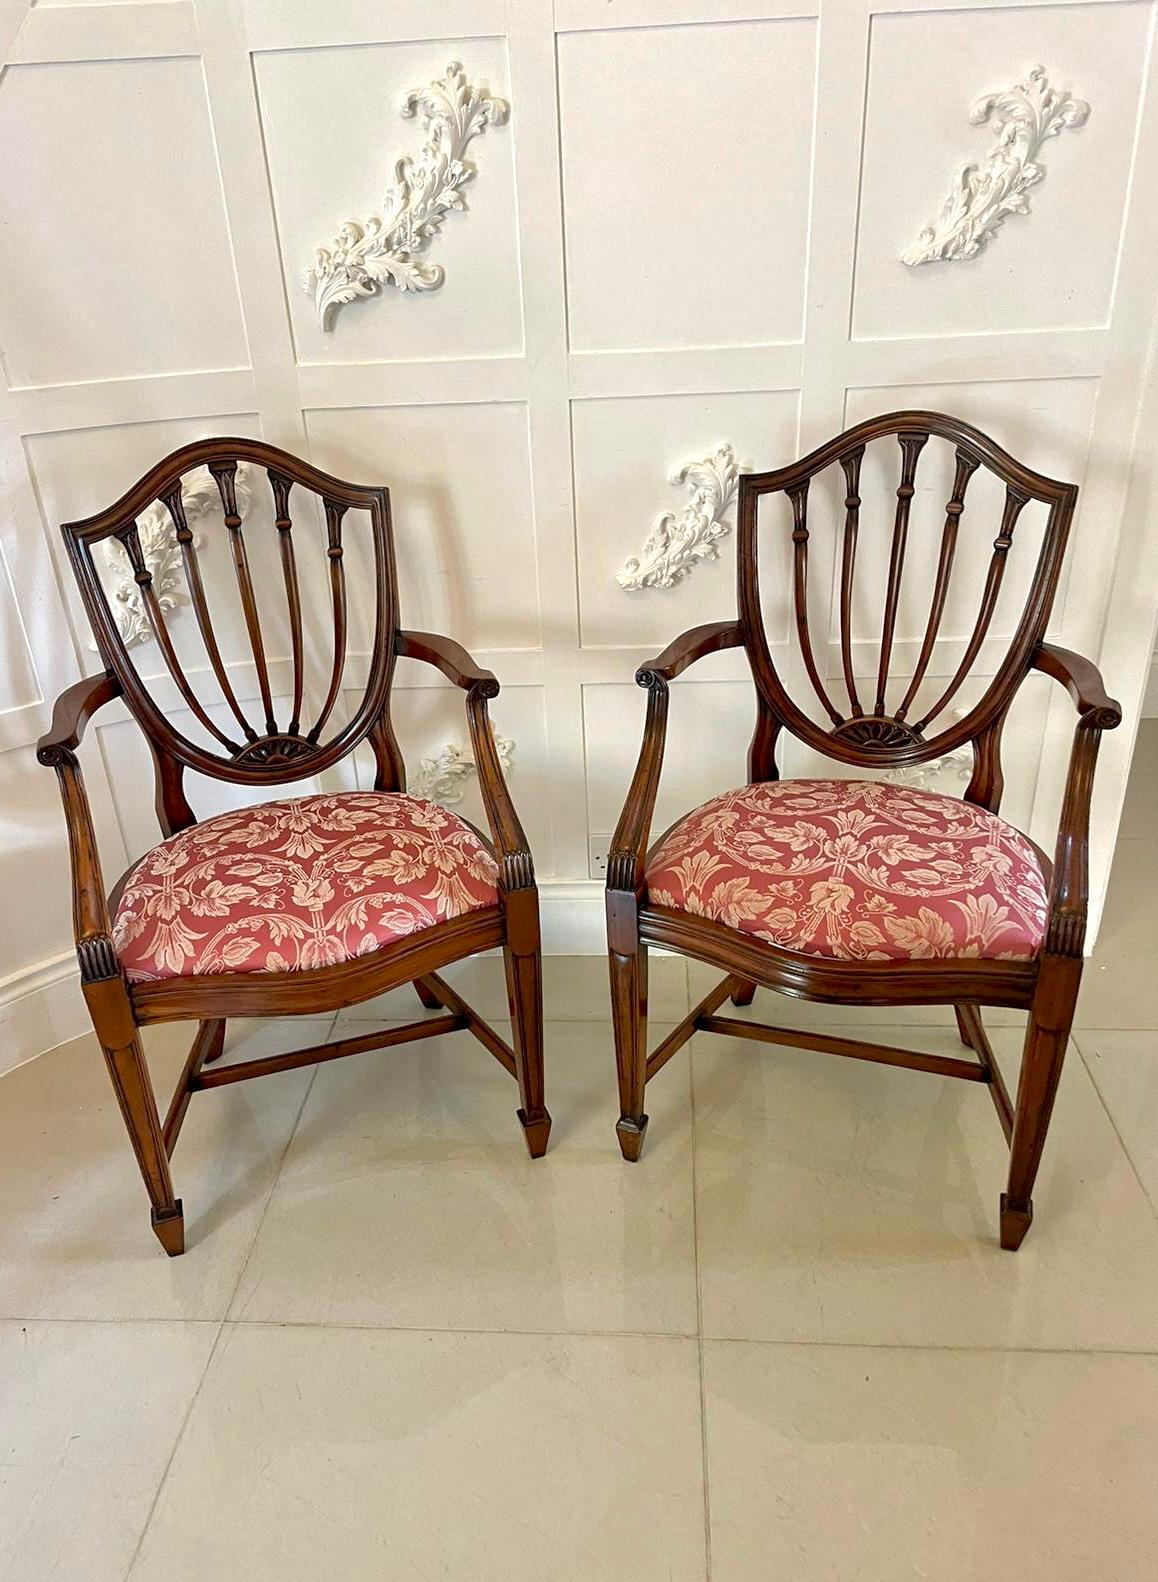 classic chairs with shield shaped backs